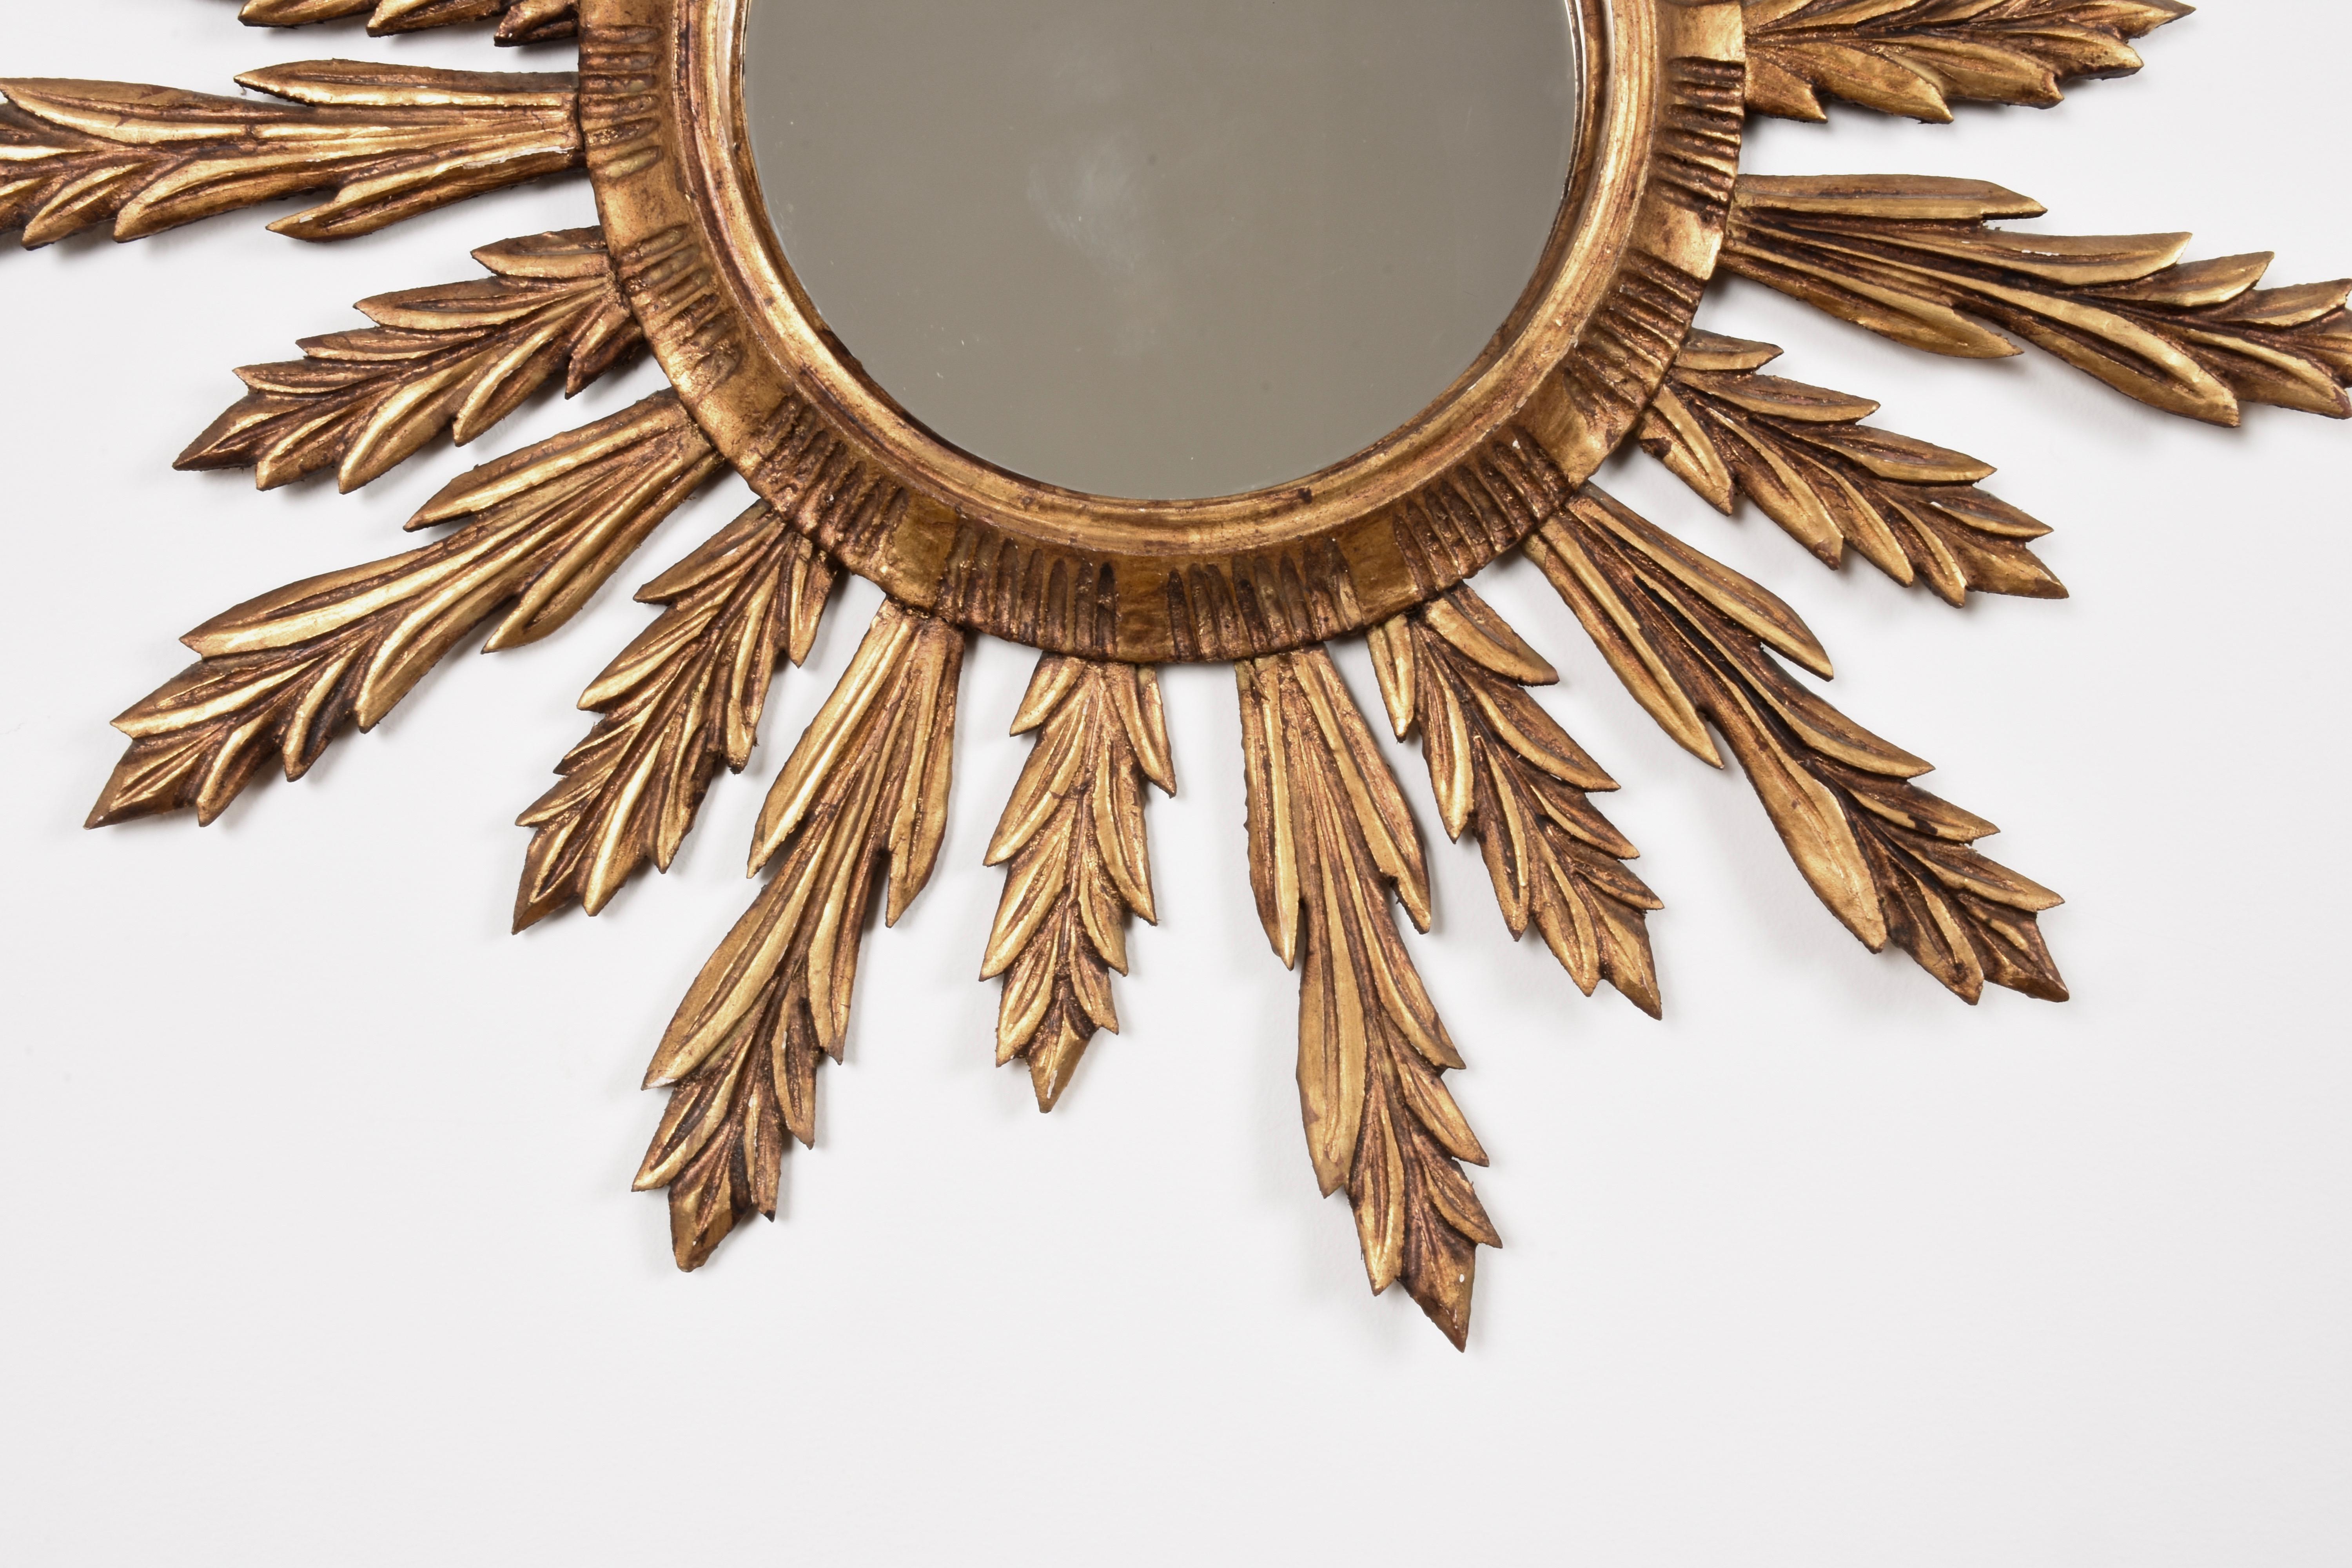 20th Century Wall Mirror in Gilded Wood, Giltwood Sunburst Vintage, France 1950s, Lucky Charm